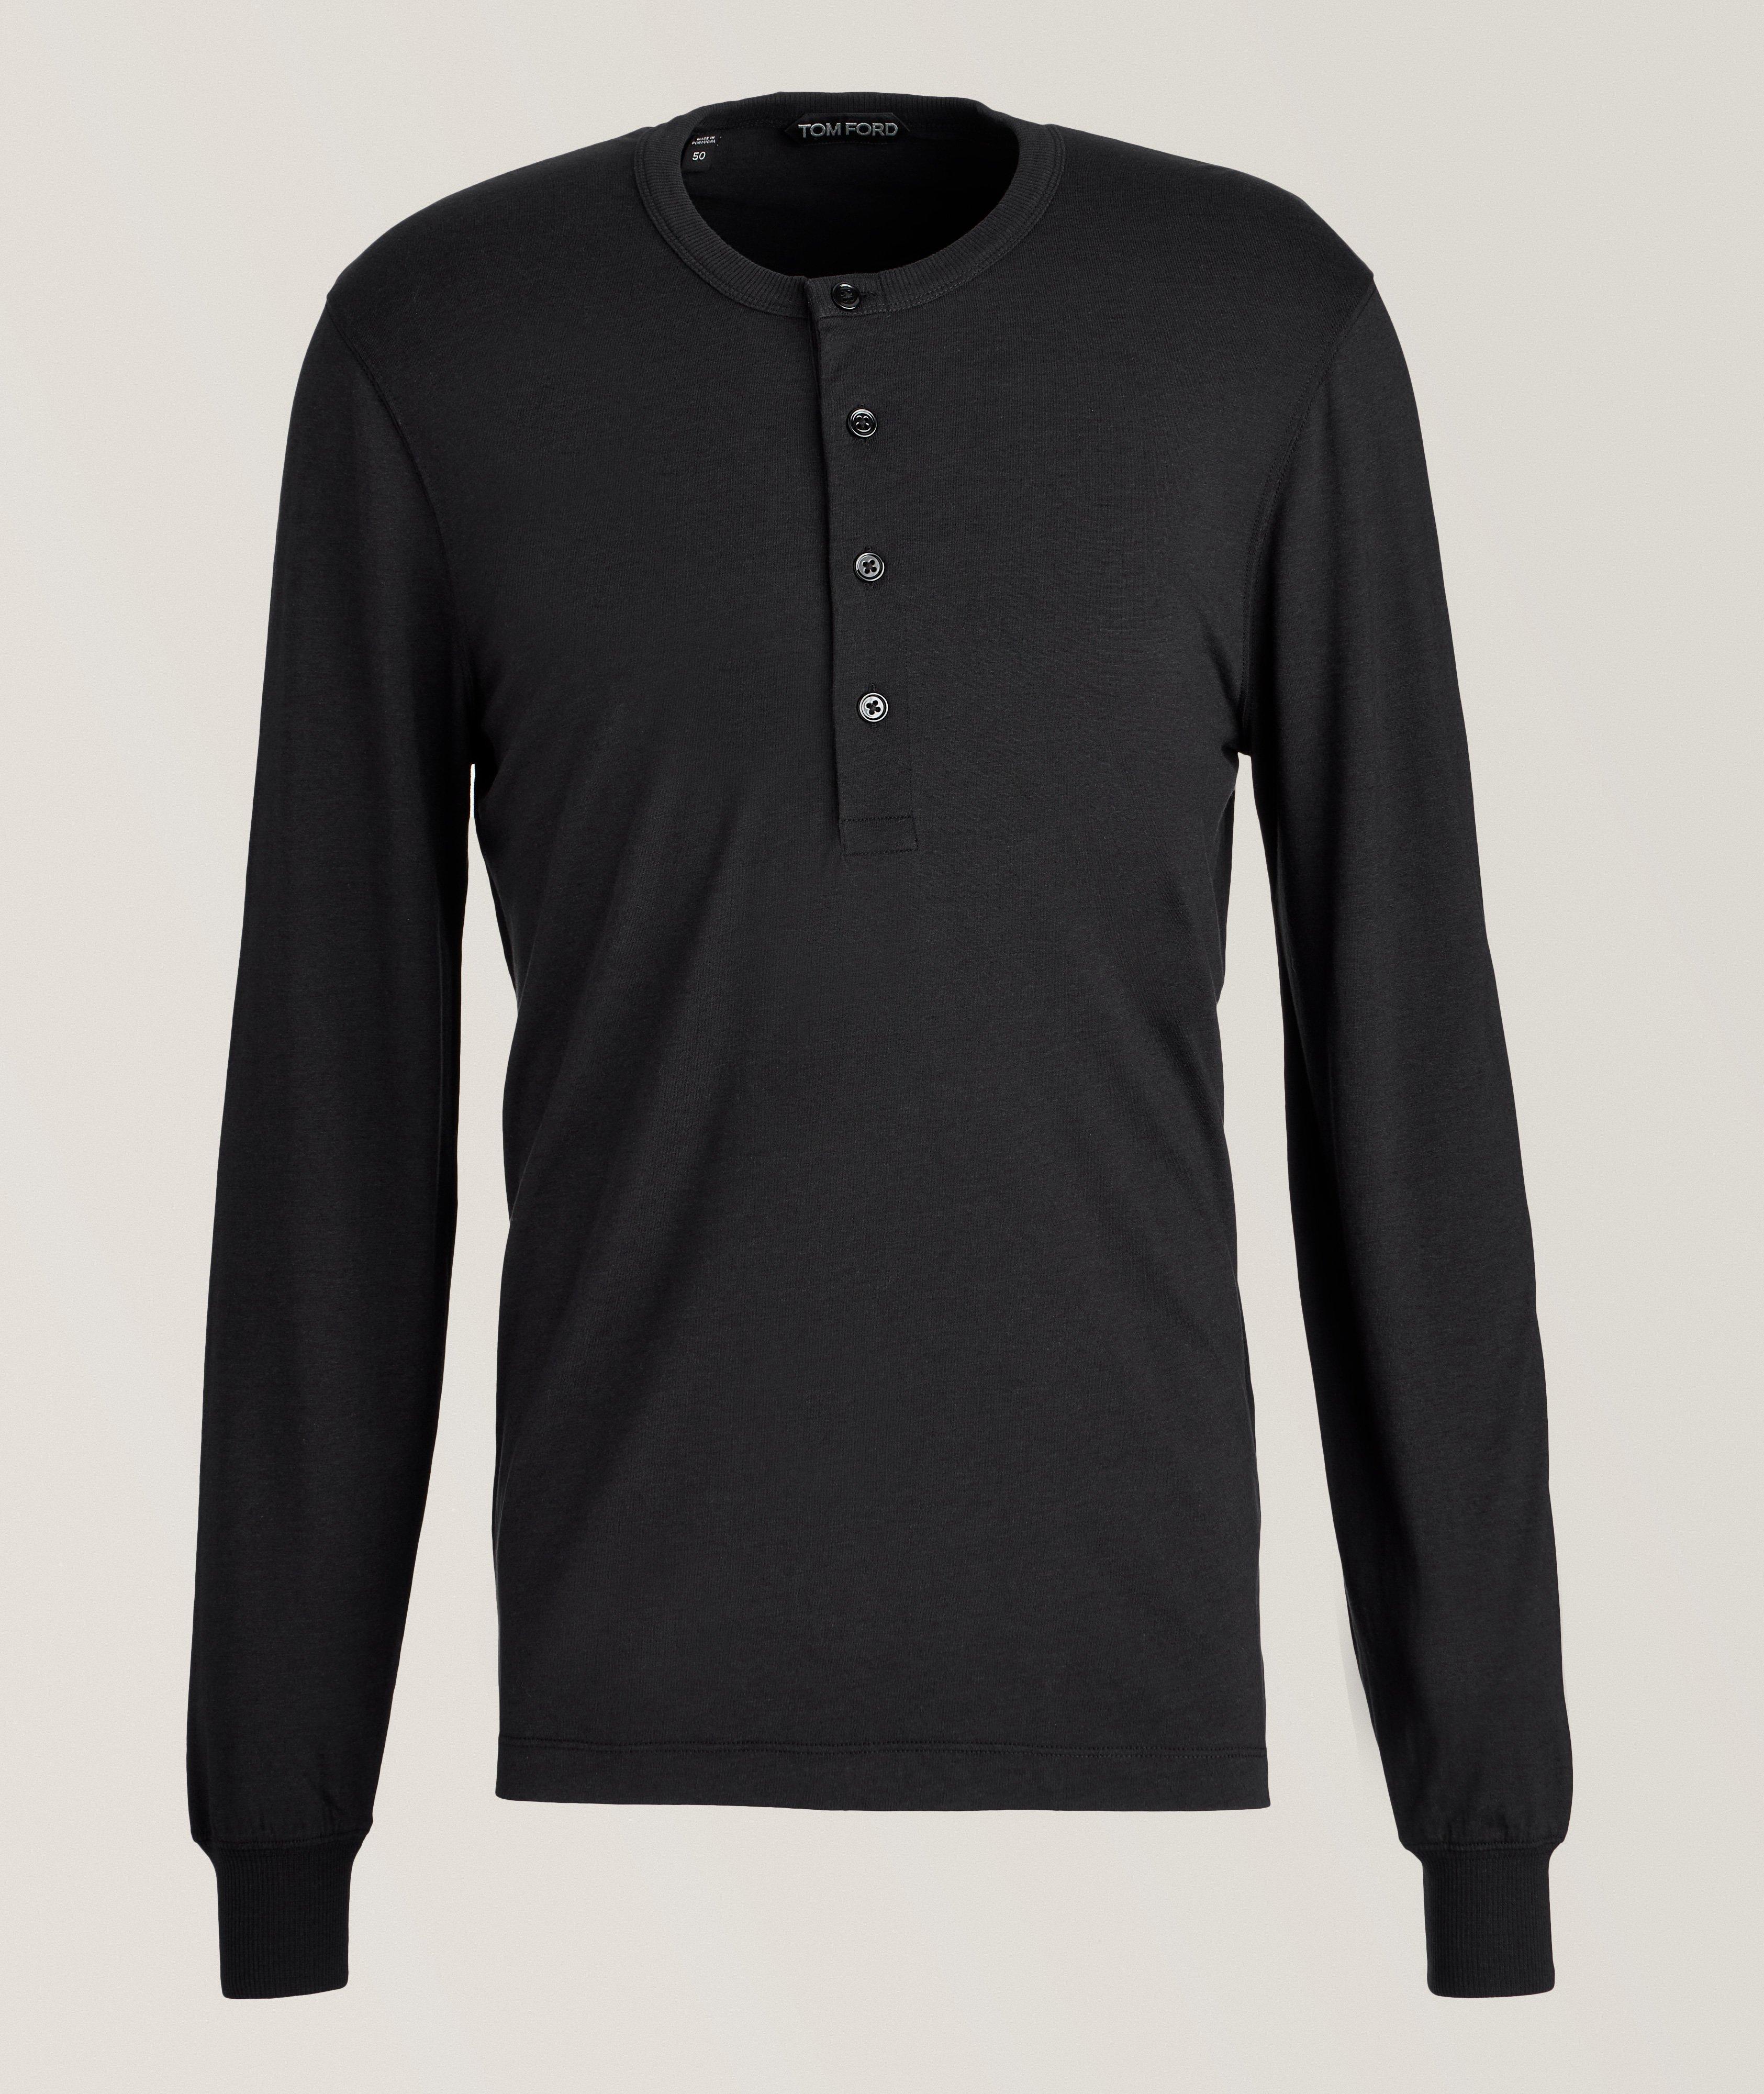 Ribbed Detailed Cotton-Blend Henley image 0